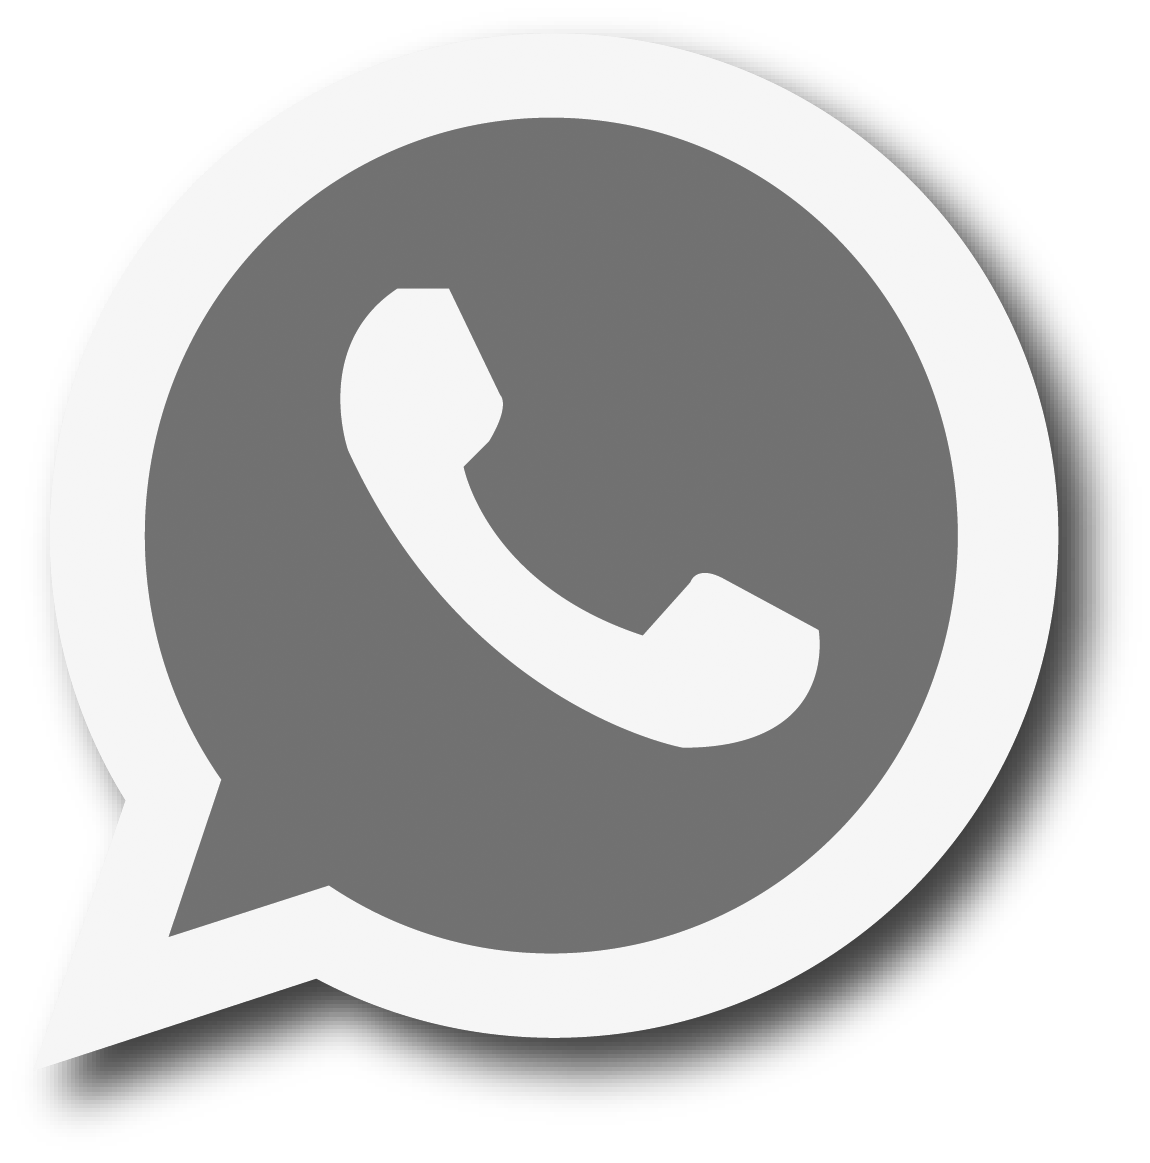 Whatsapp Icon Logo Whatsapp Logo Whatsapp Logo Free Png Pngfuel All